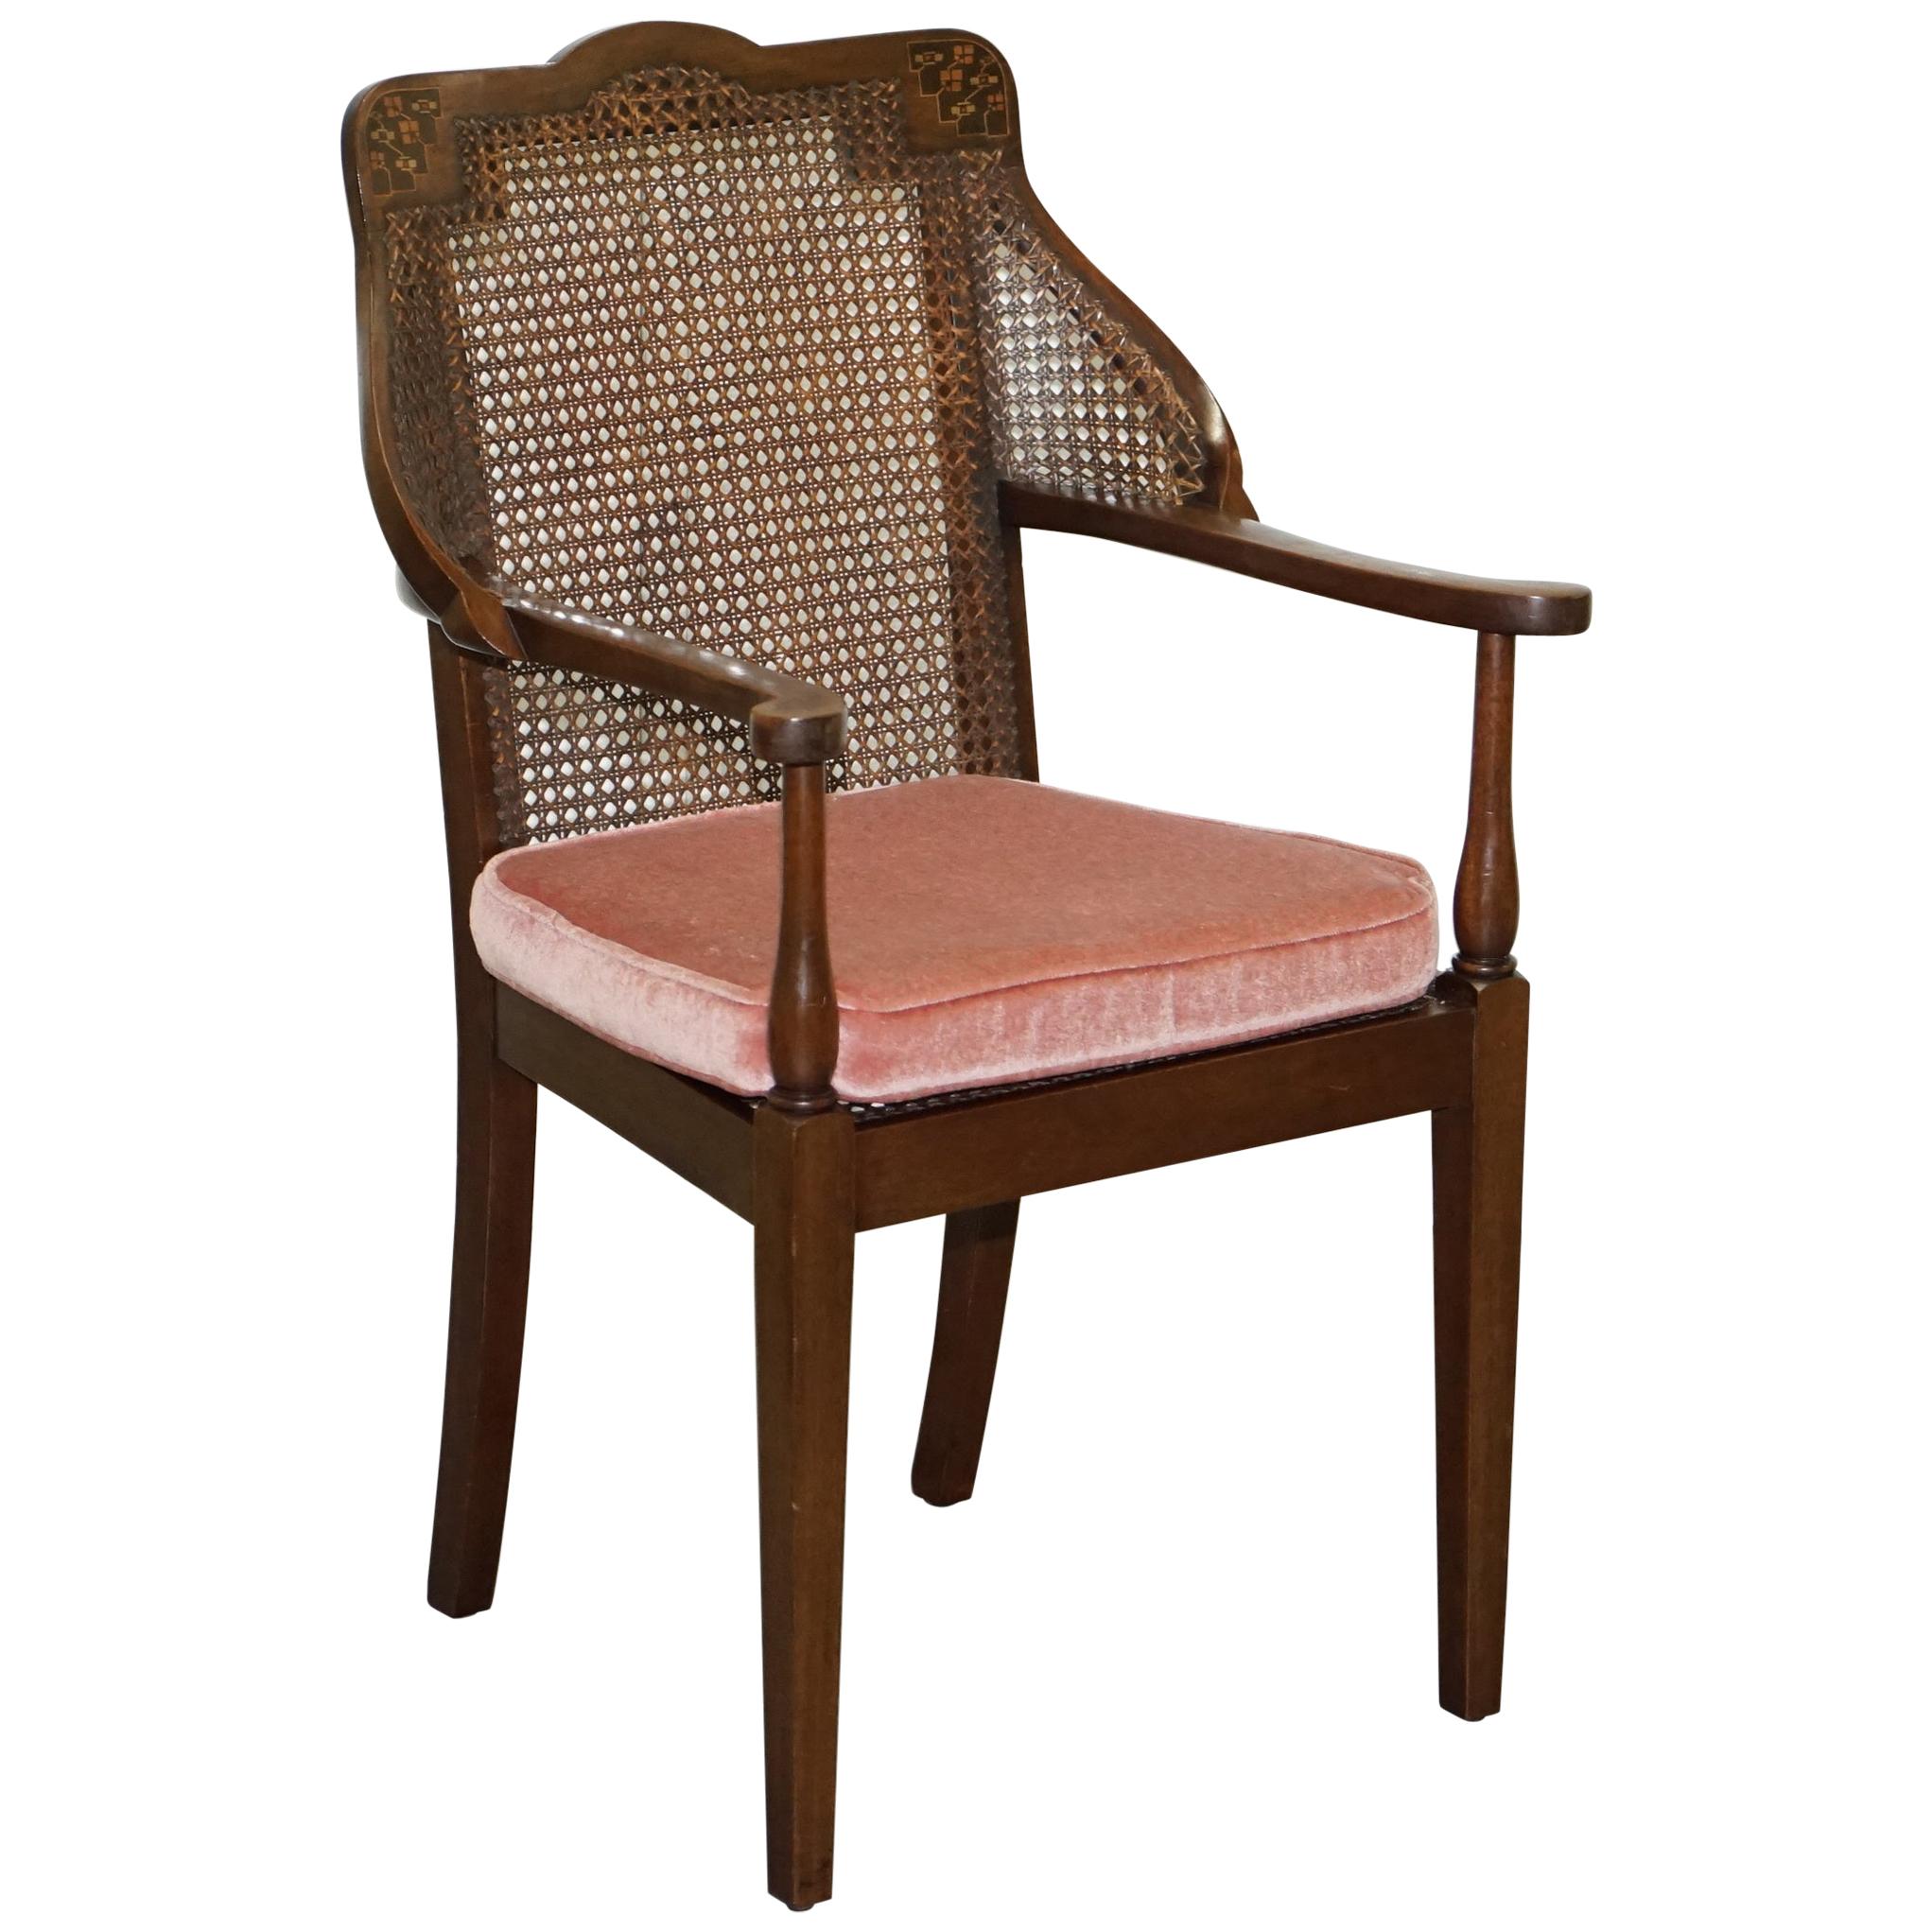 Lovely Vintage Berger Mahogany Carved Wood Rattan Armchair with Velour Cushion